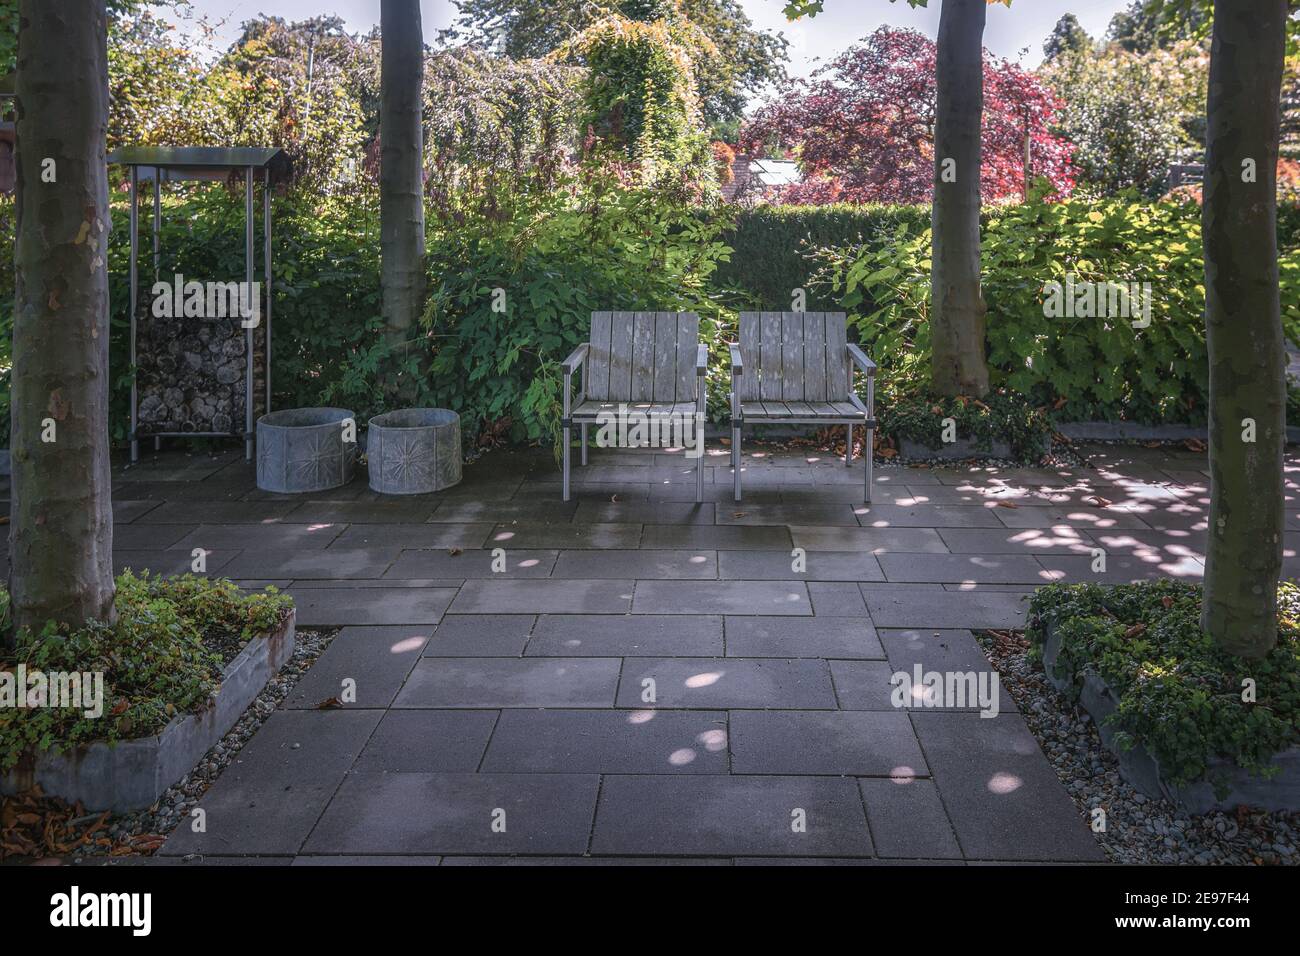 Appeltern, The Netherlands, July 30, 2020: Appeltern Gardens in the Netherlands is an opportunity to meet fresh and creative ideas in the field of gar Stock Photo